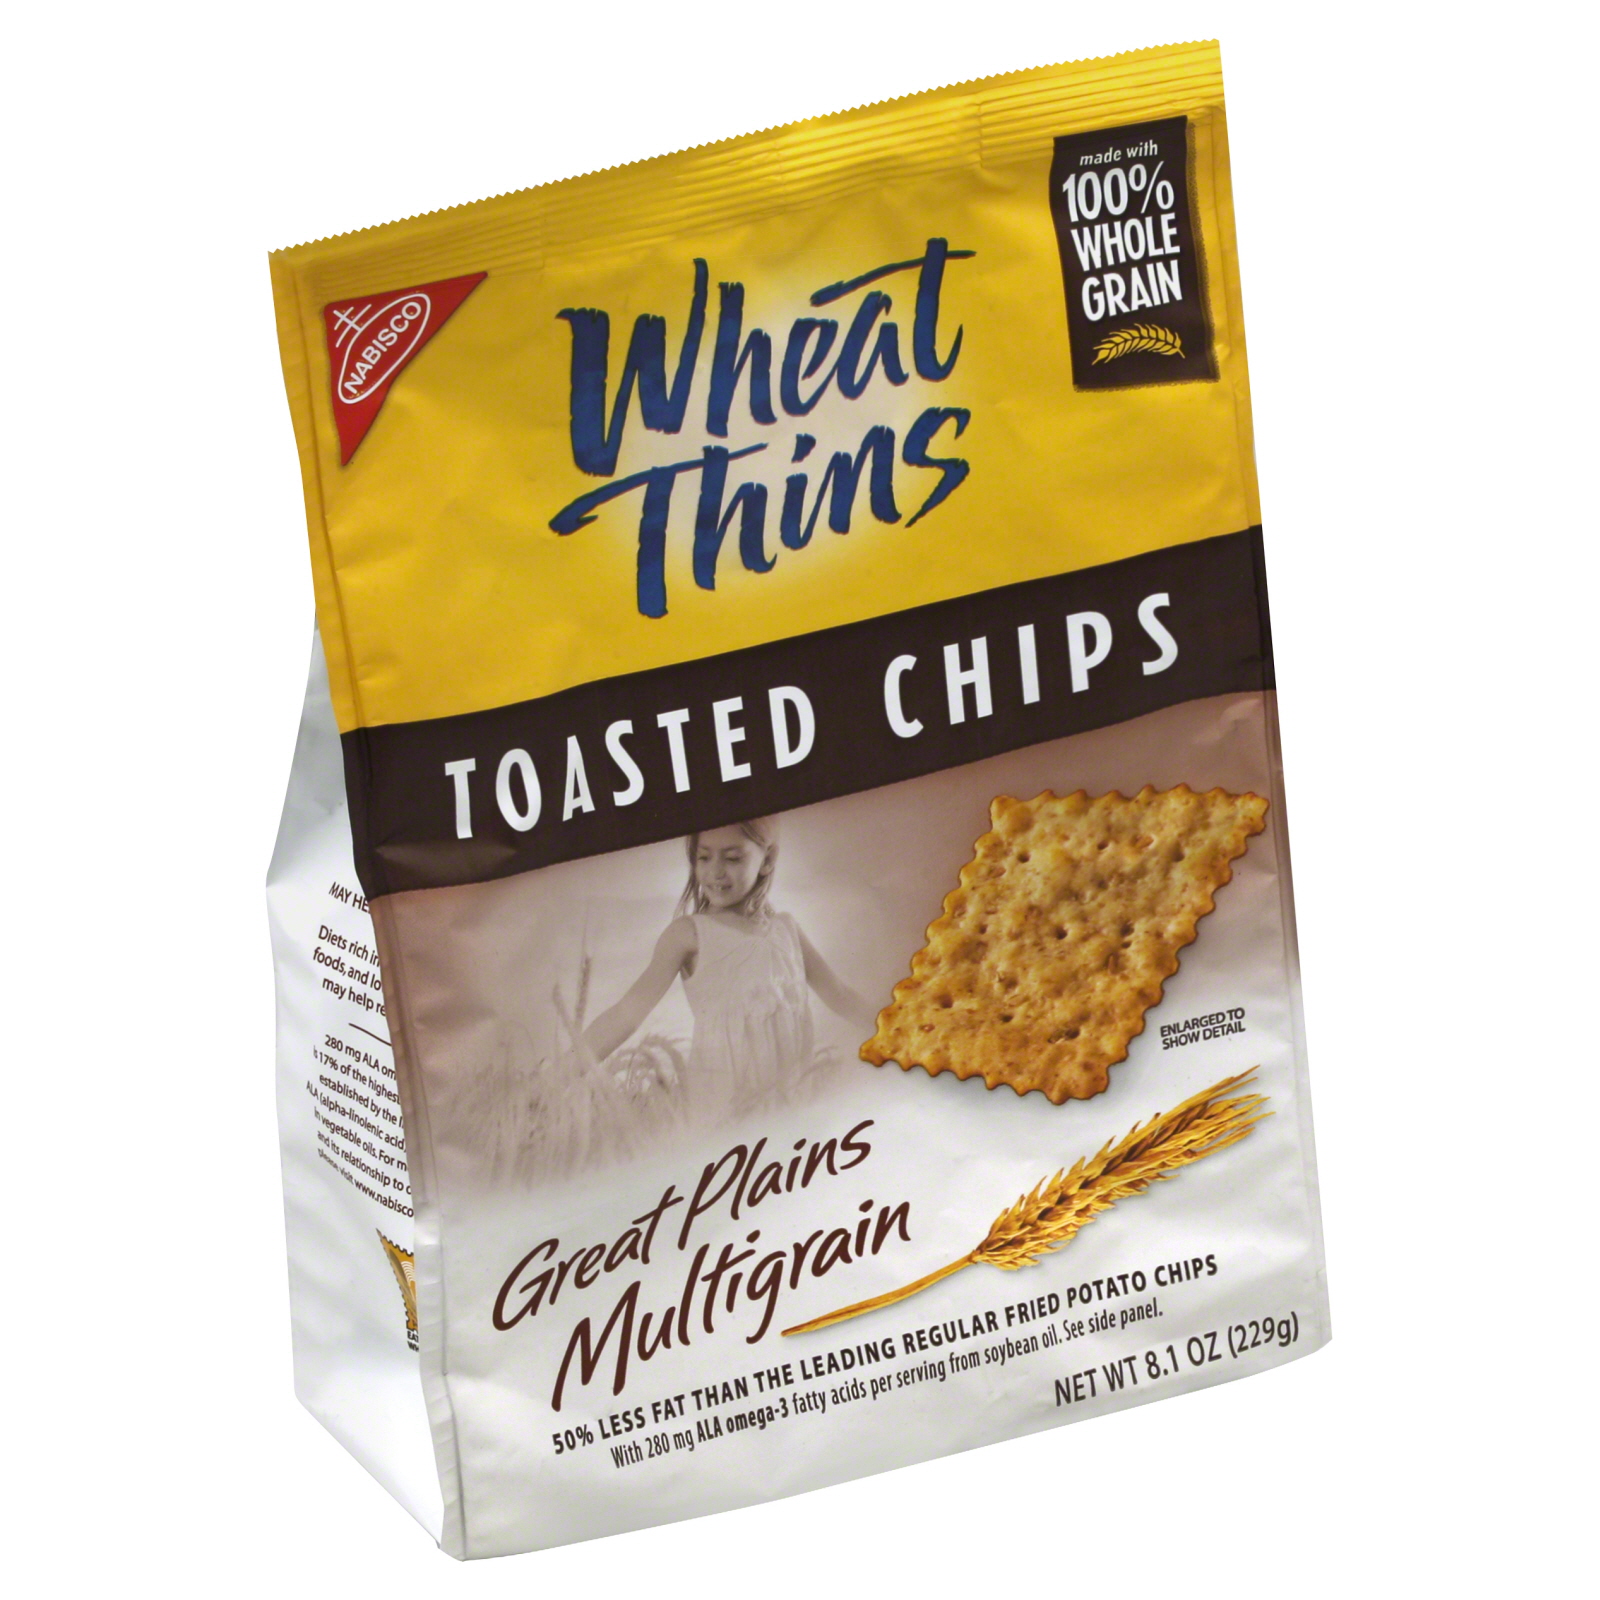 Nabisco Wheat Thins Toasted Chips, Great Plains Multigrain, 8.1 oz (229 g)